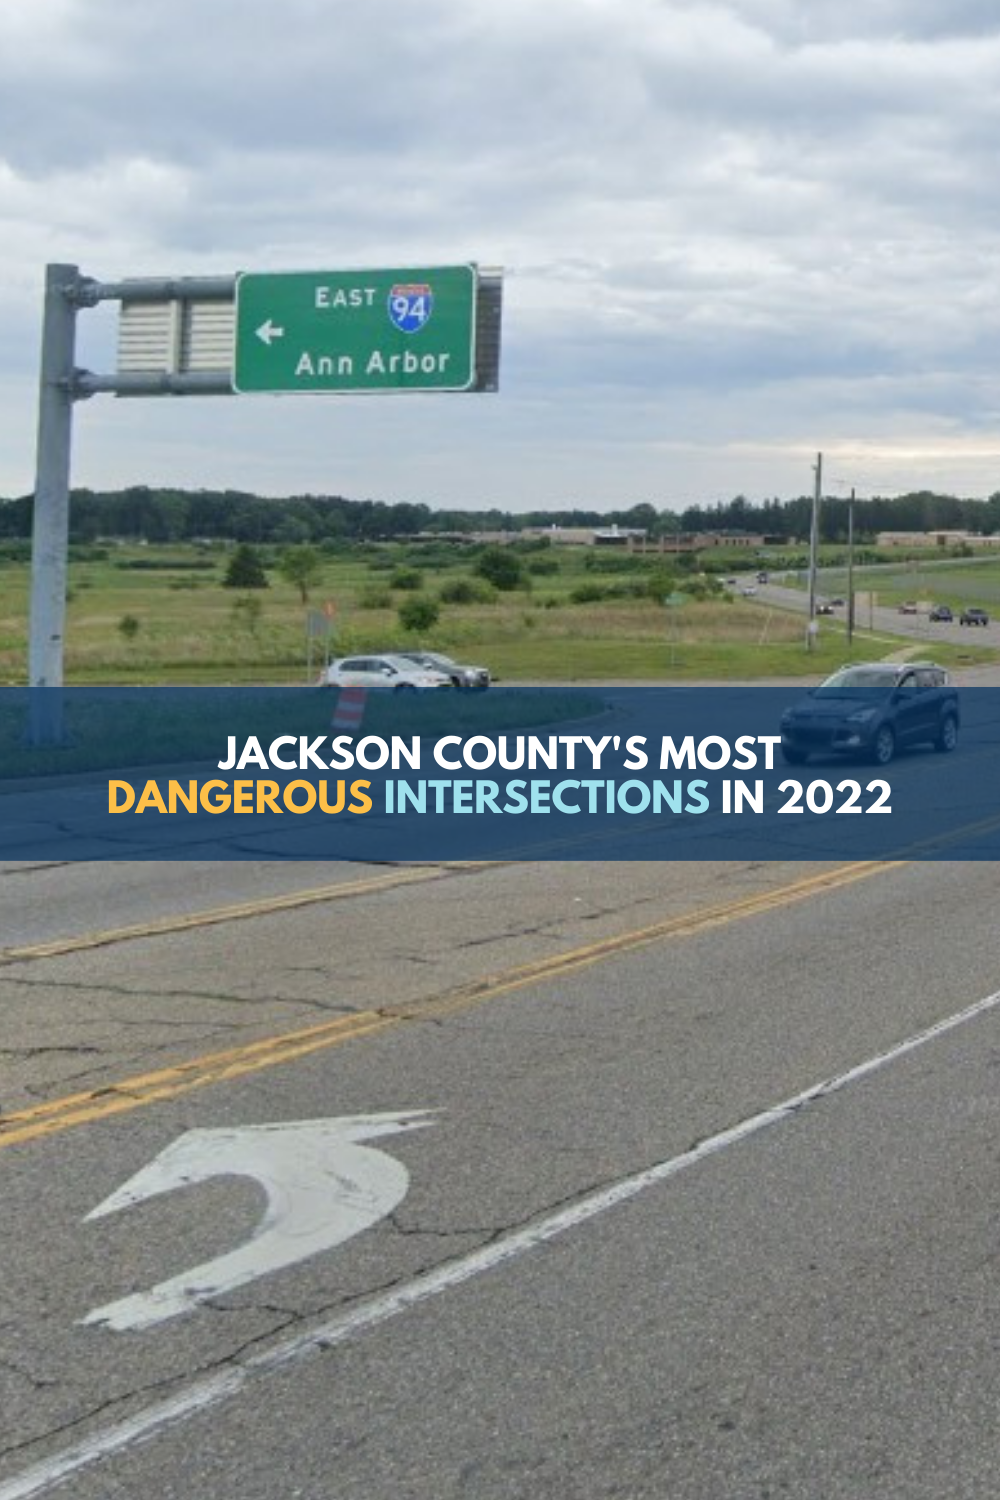 Jackson County’s Most Dangerous Intersections in 2022